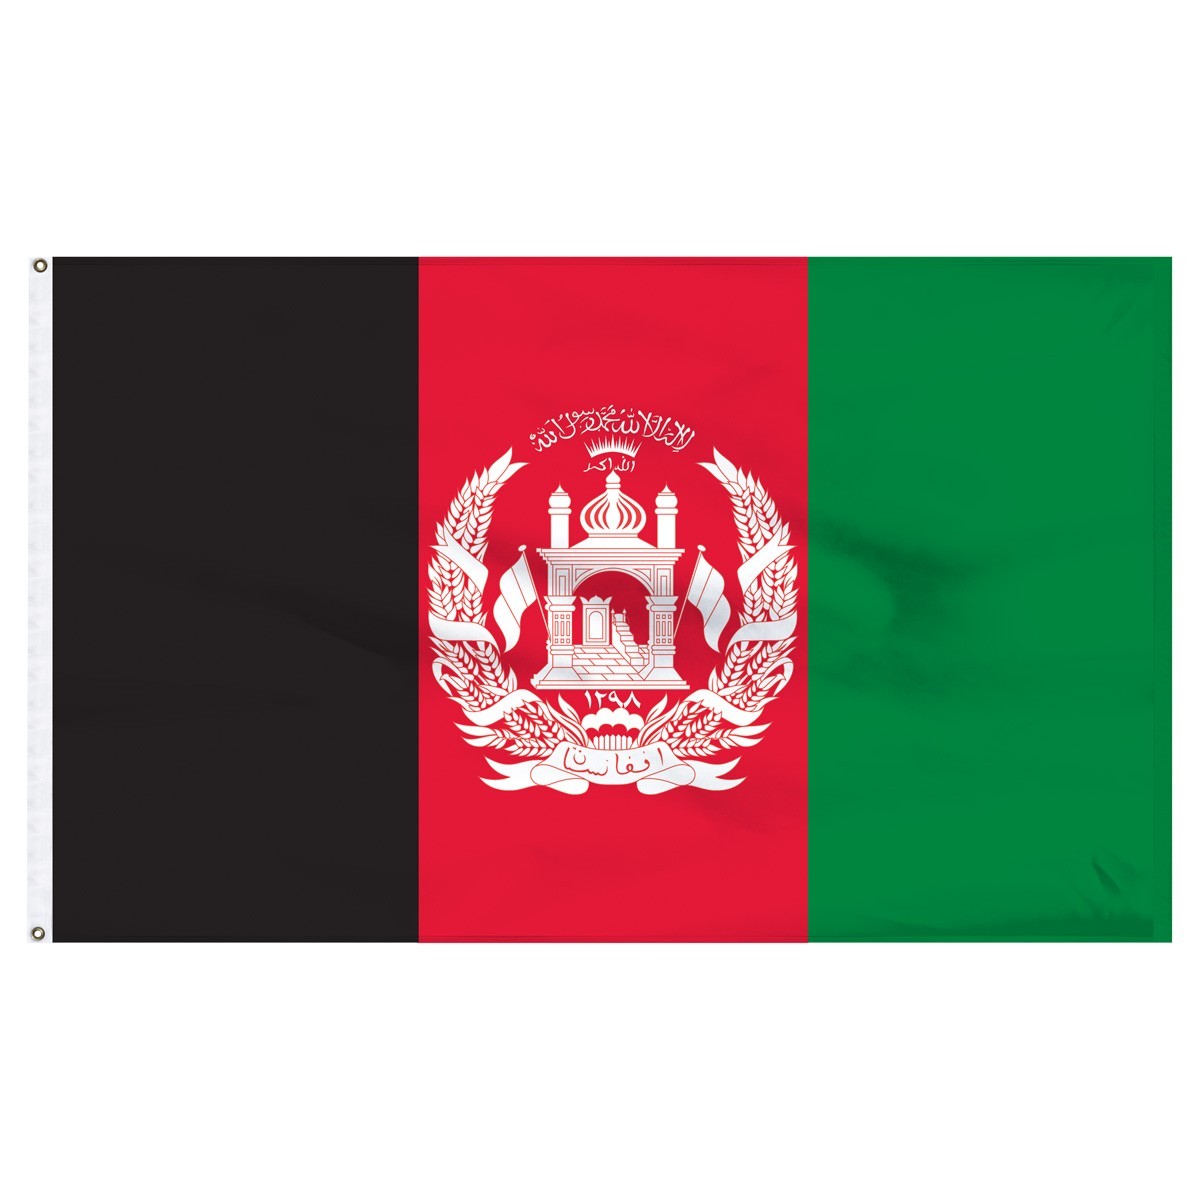 Shop Afghanistan world flags for sale high quality online with 1-800 Flags